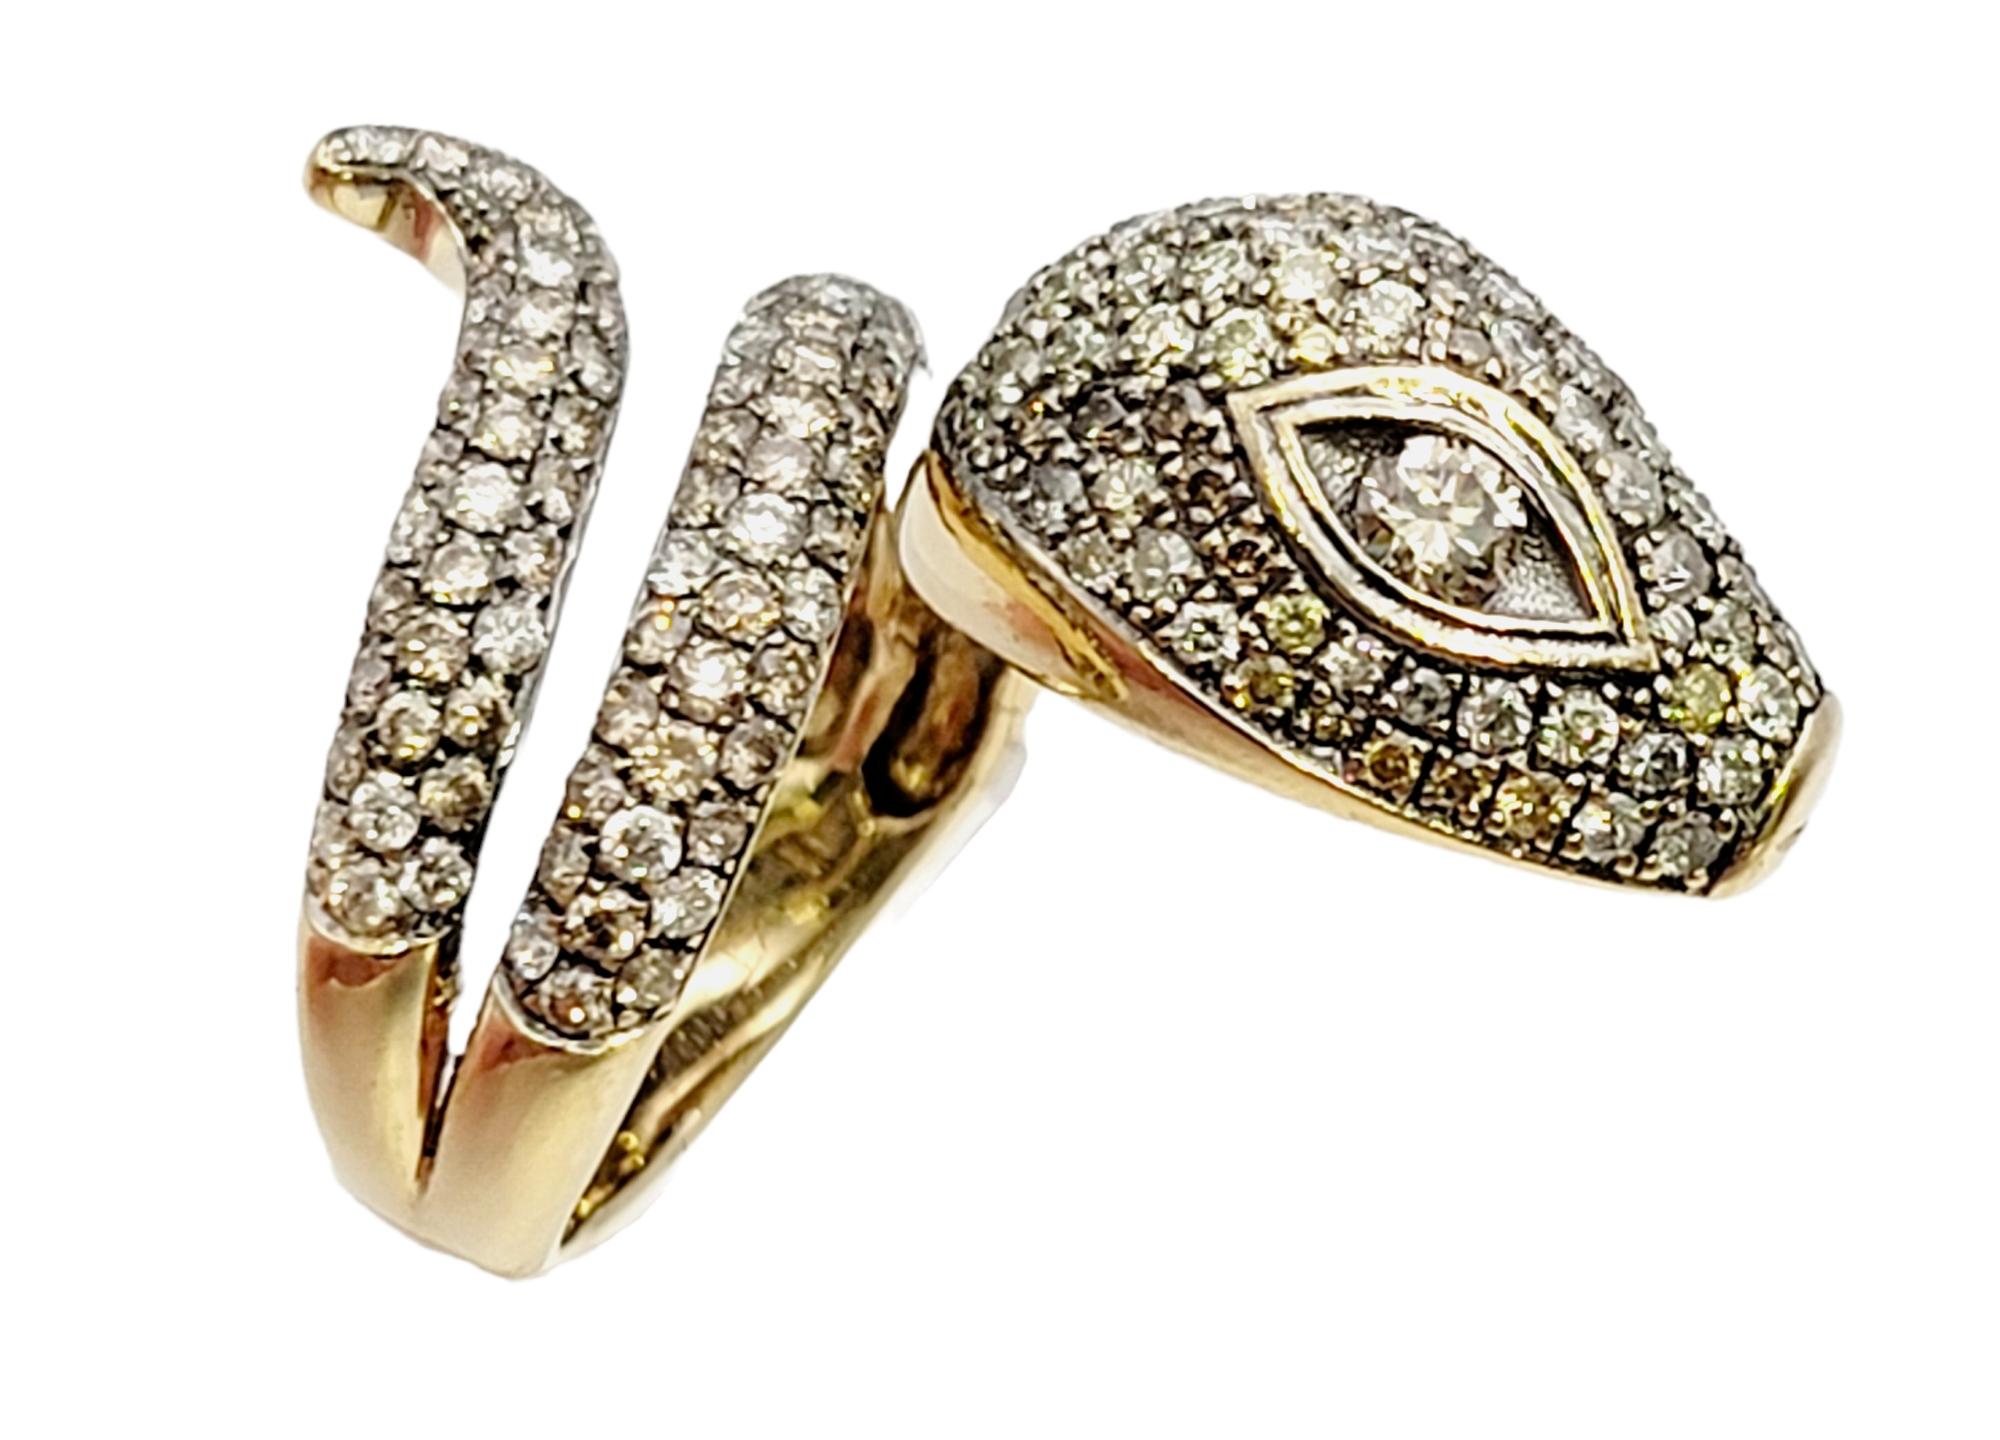 Ring size: 5.5

We absolutely adore this sparkling, slithering snake ring from popular jewelry designer, Le Vian. This dazzling designer piece wraps elegantly around the finger and fills it with sparkle. The sleek head of the snake is embellished in